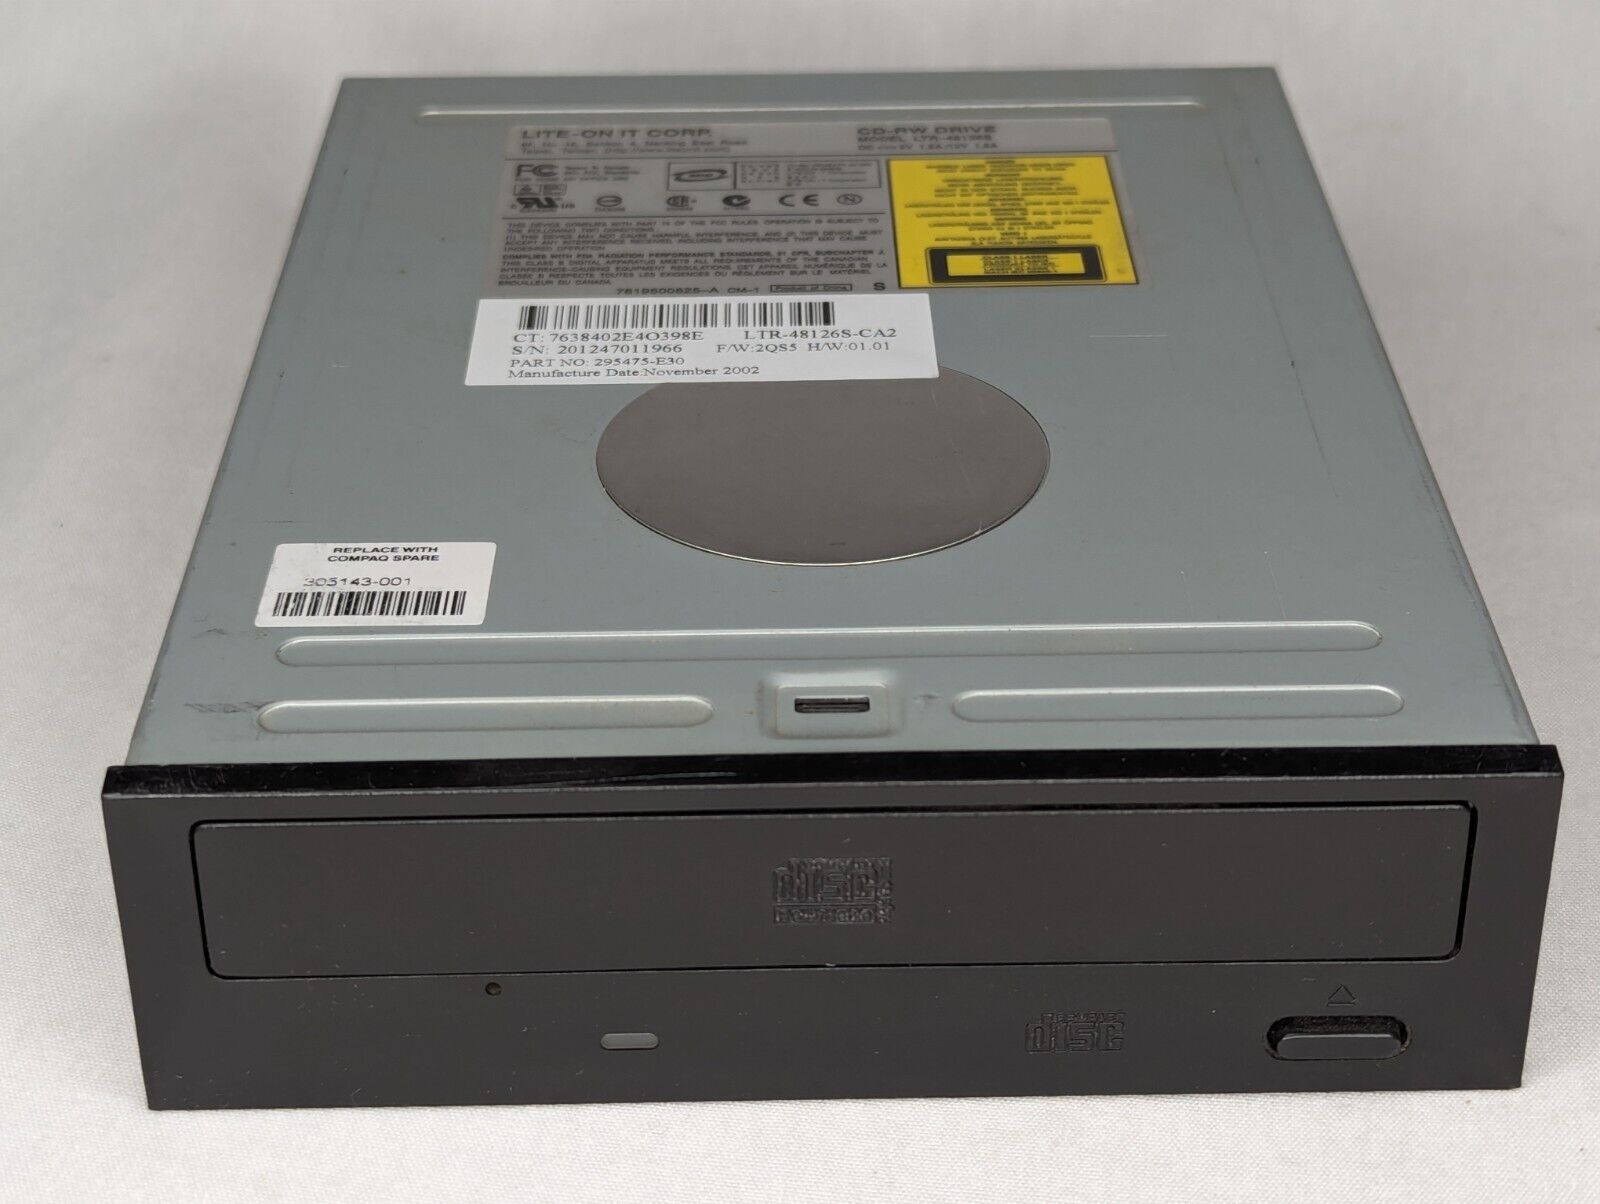 Lite-on It Corp LTR-48126S CD-RW Drive - Untested